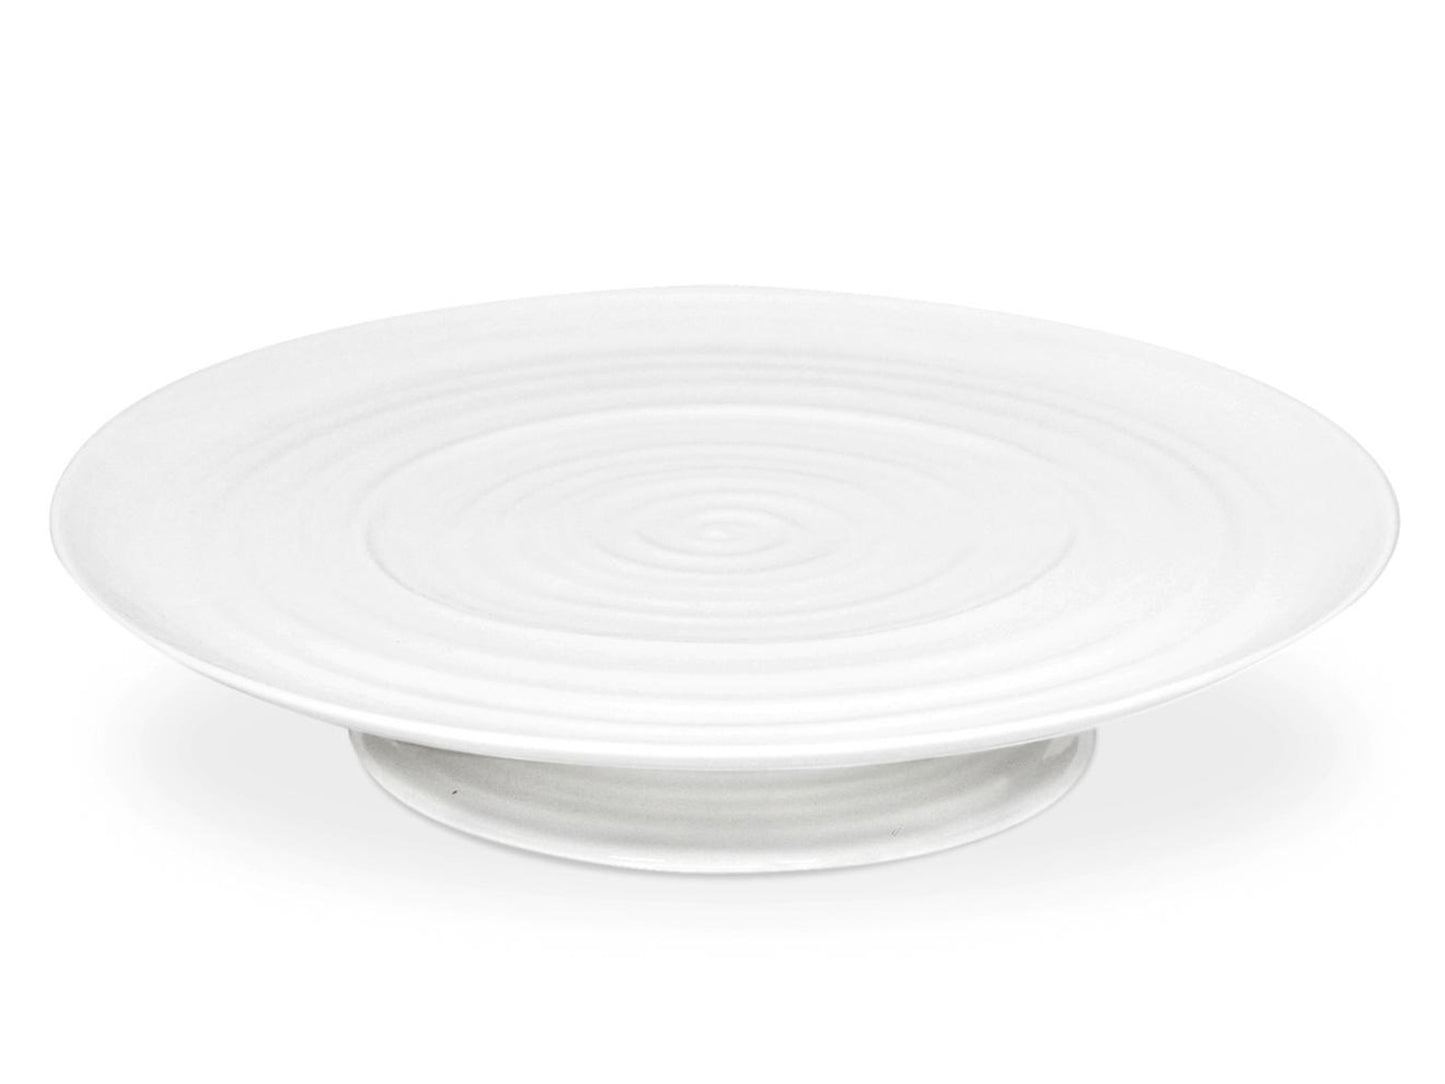 Sophie Conran Cake Plate - White Footed